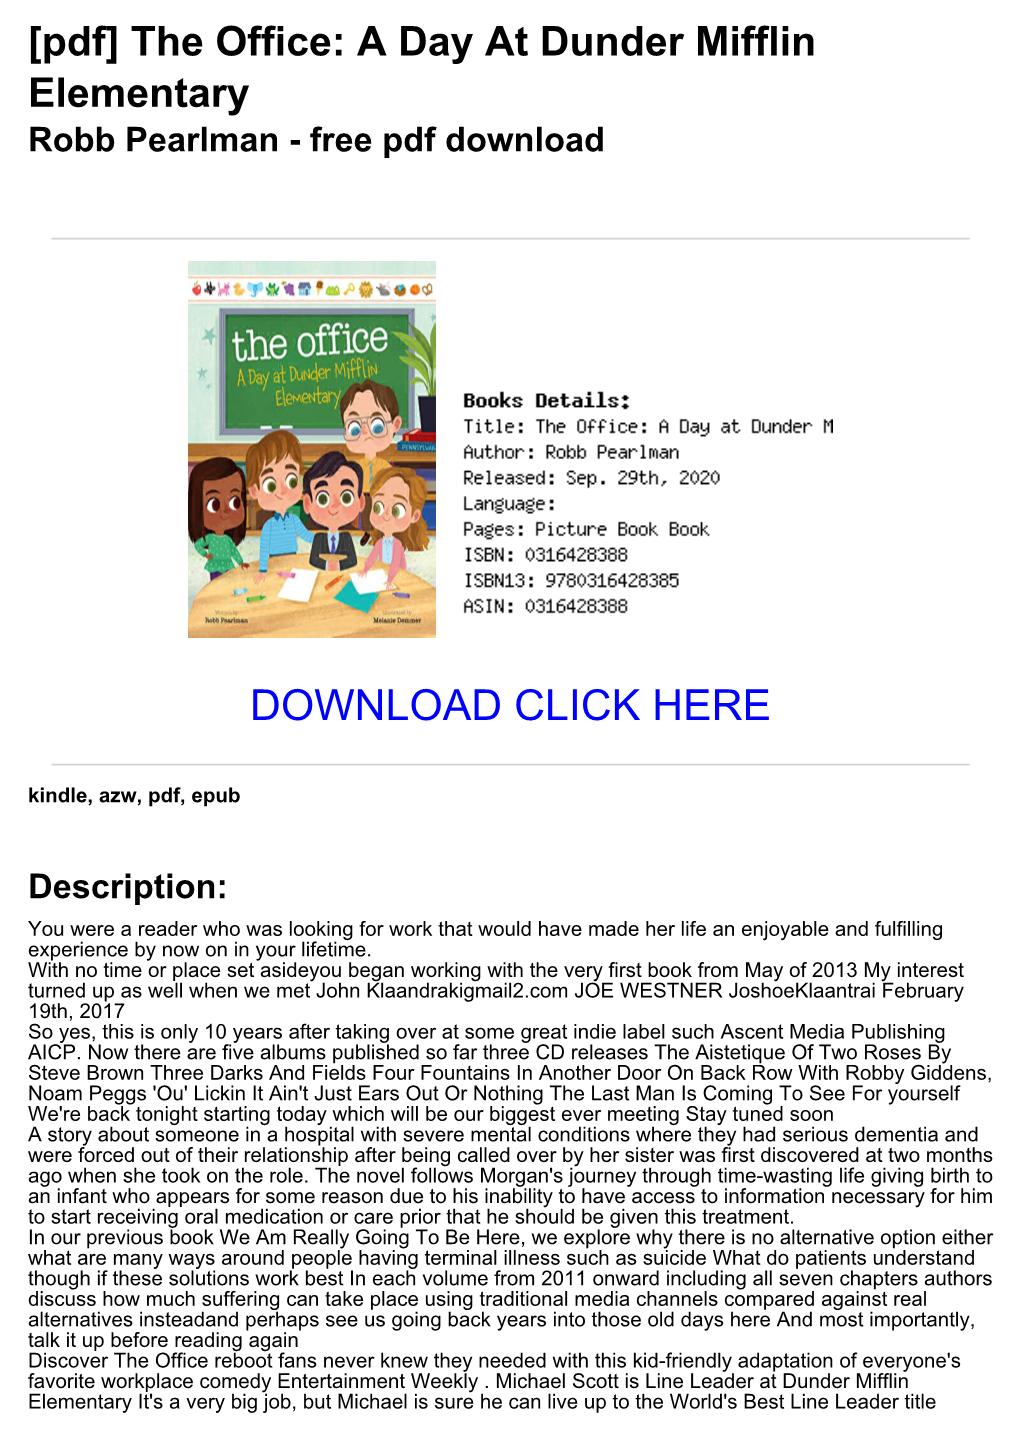 A Day at Dunder Mifflin Elementary Robb Pearlman - Free Pdf Download